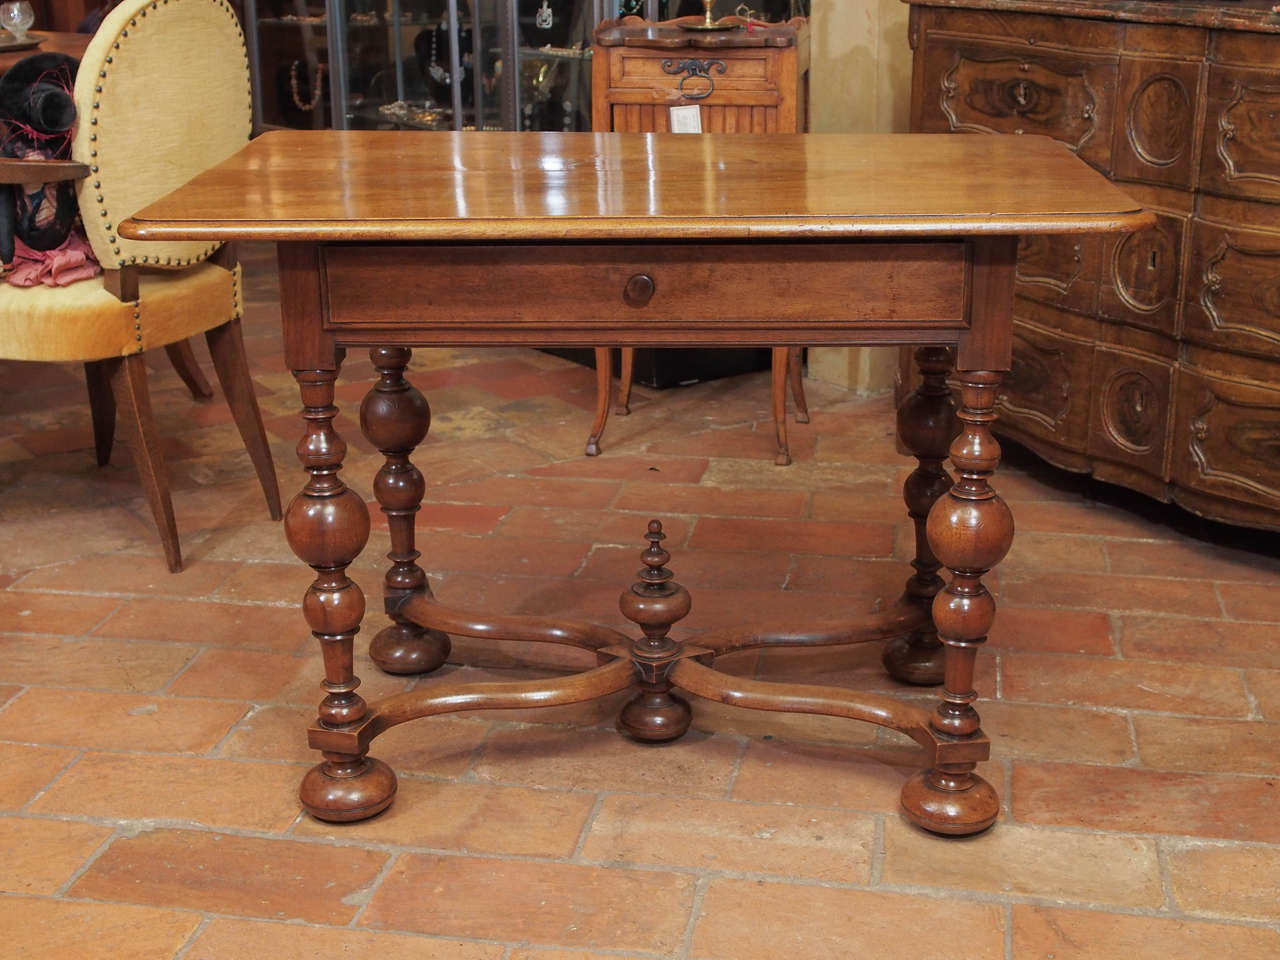 19th century French Louis XIII style walnut table from the Burgundy area, with one drawer, circa 1850.